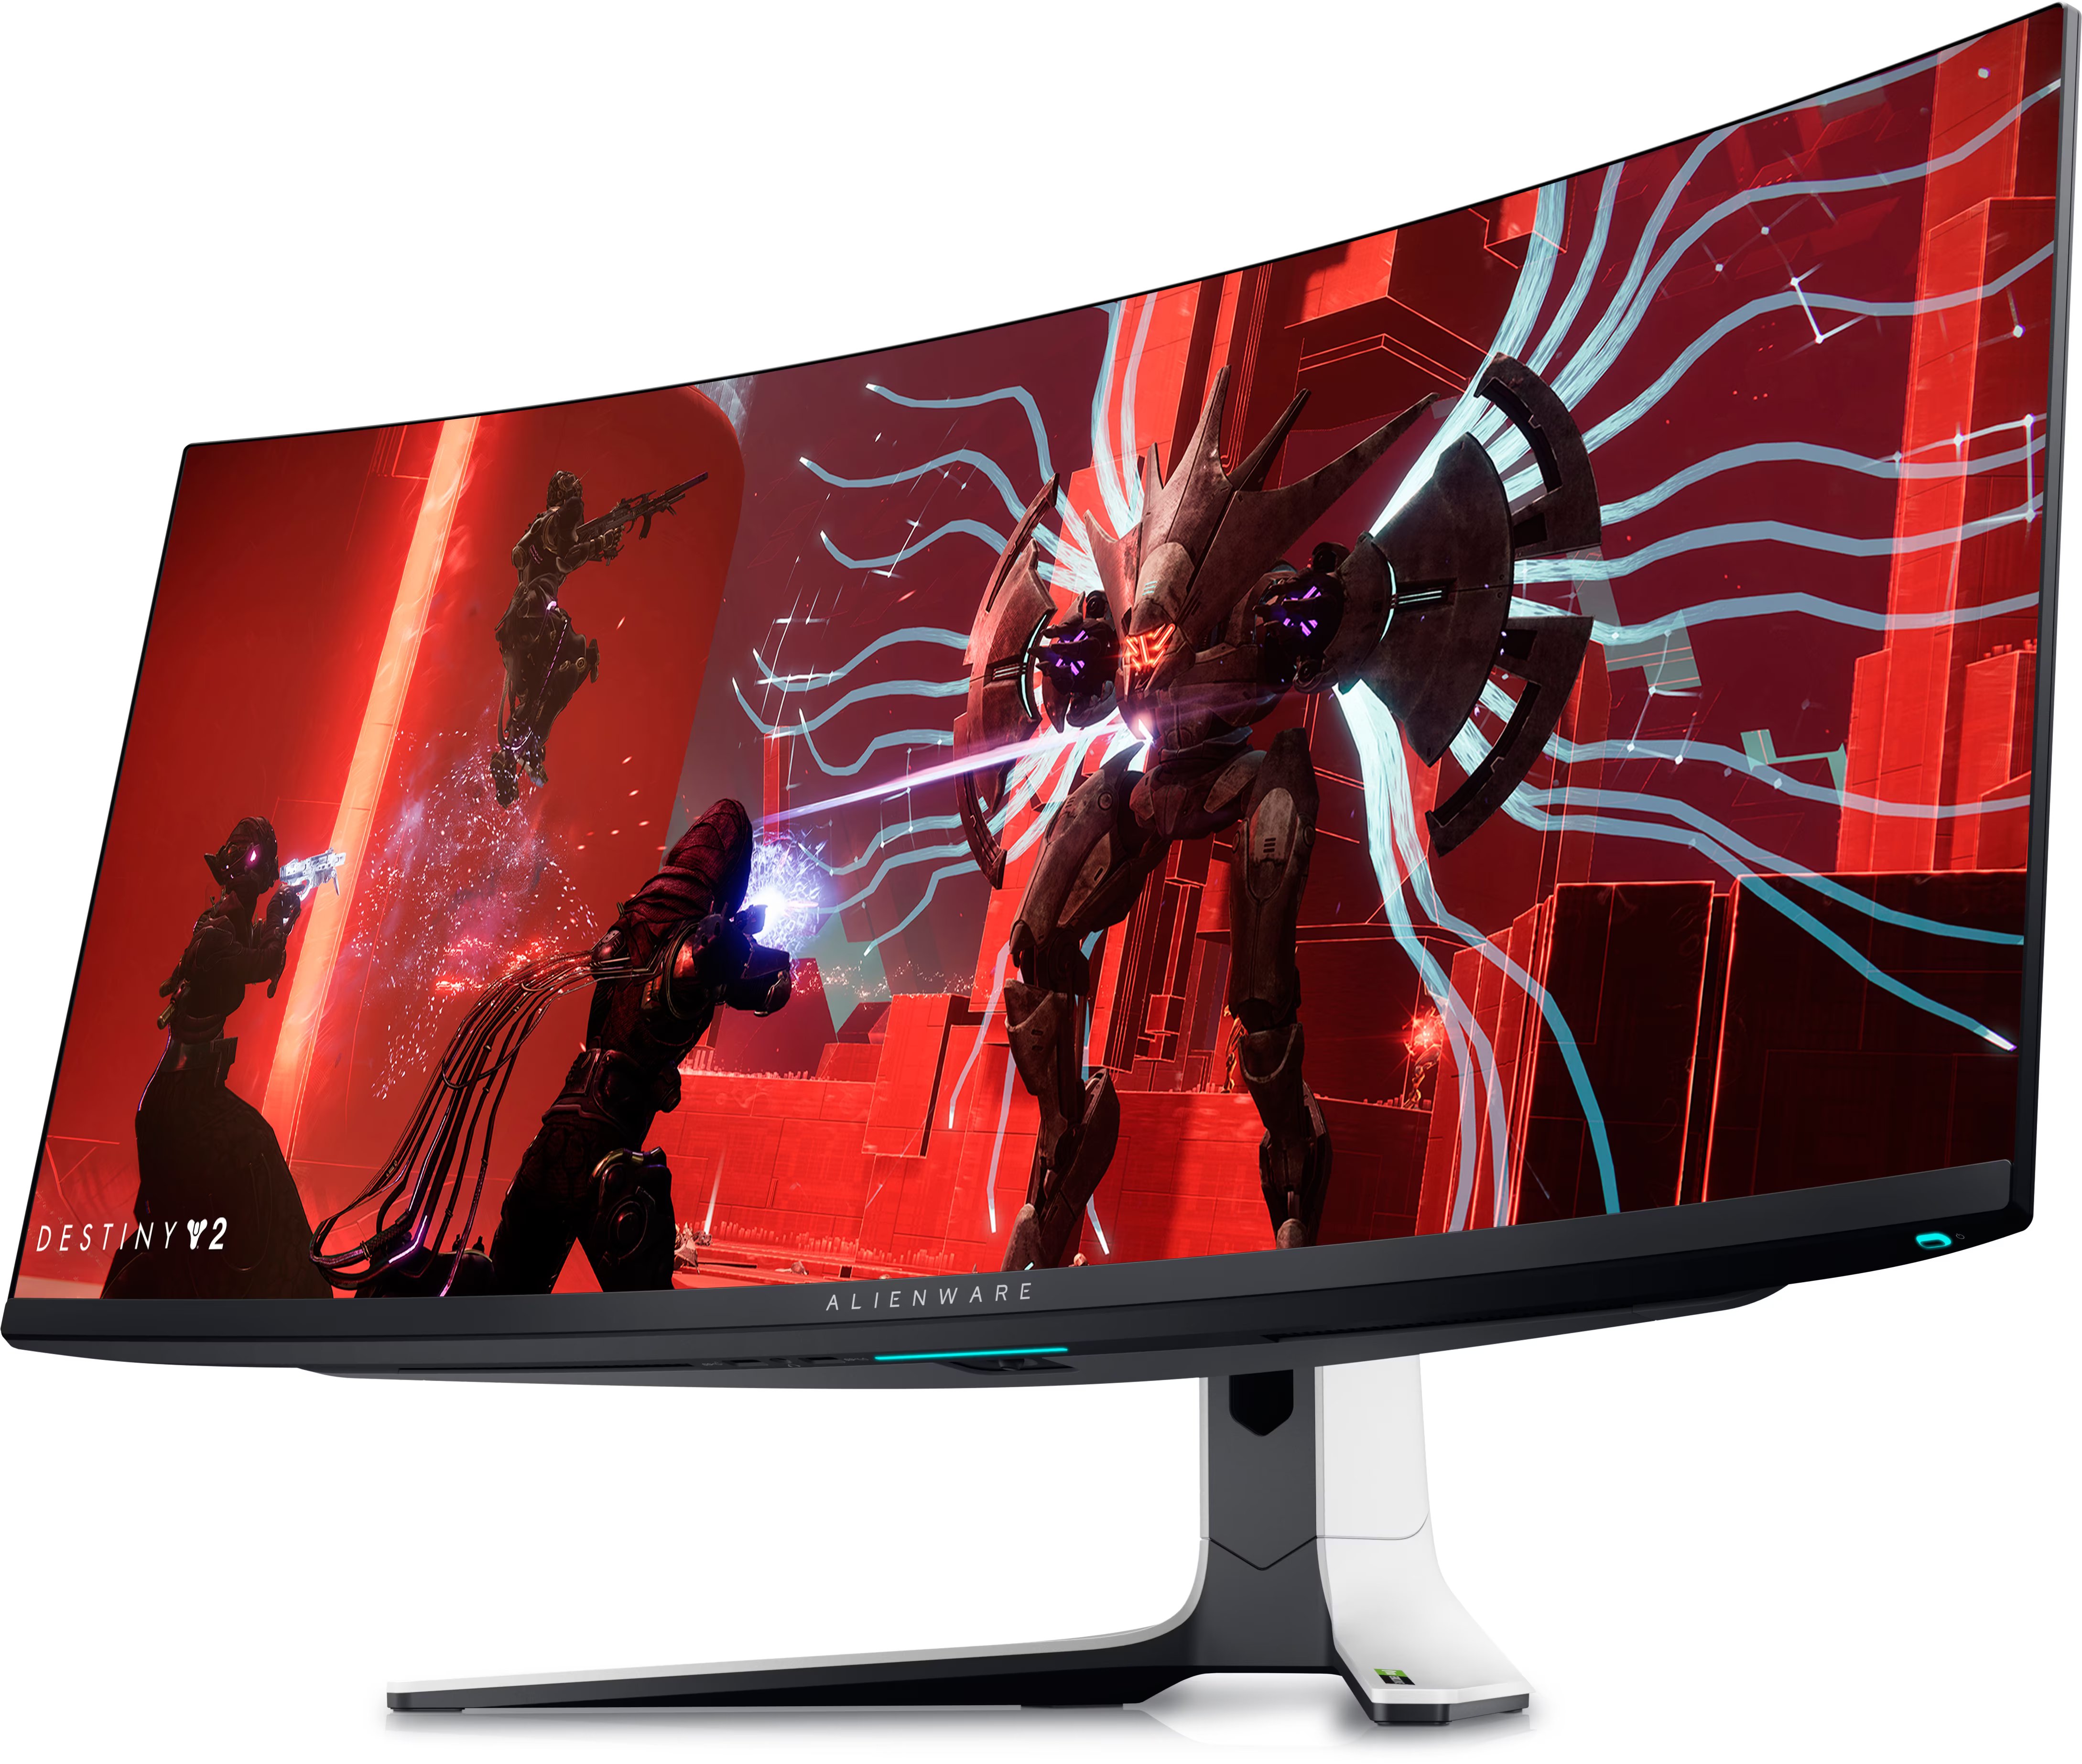 Alienware 34 inch QD OLED Gaming monitor